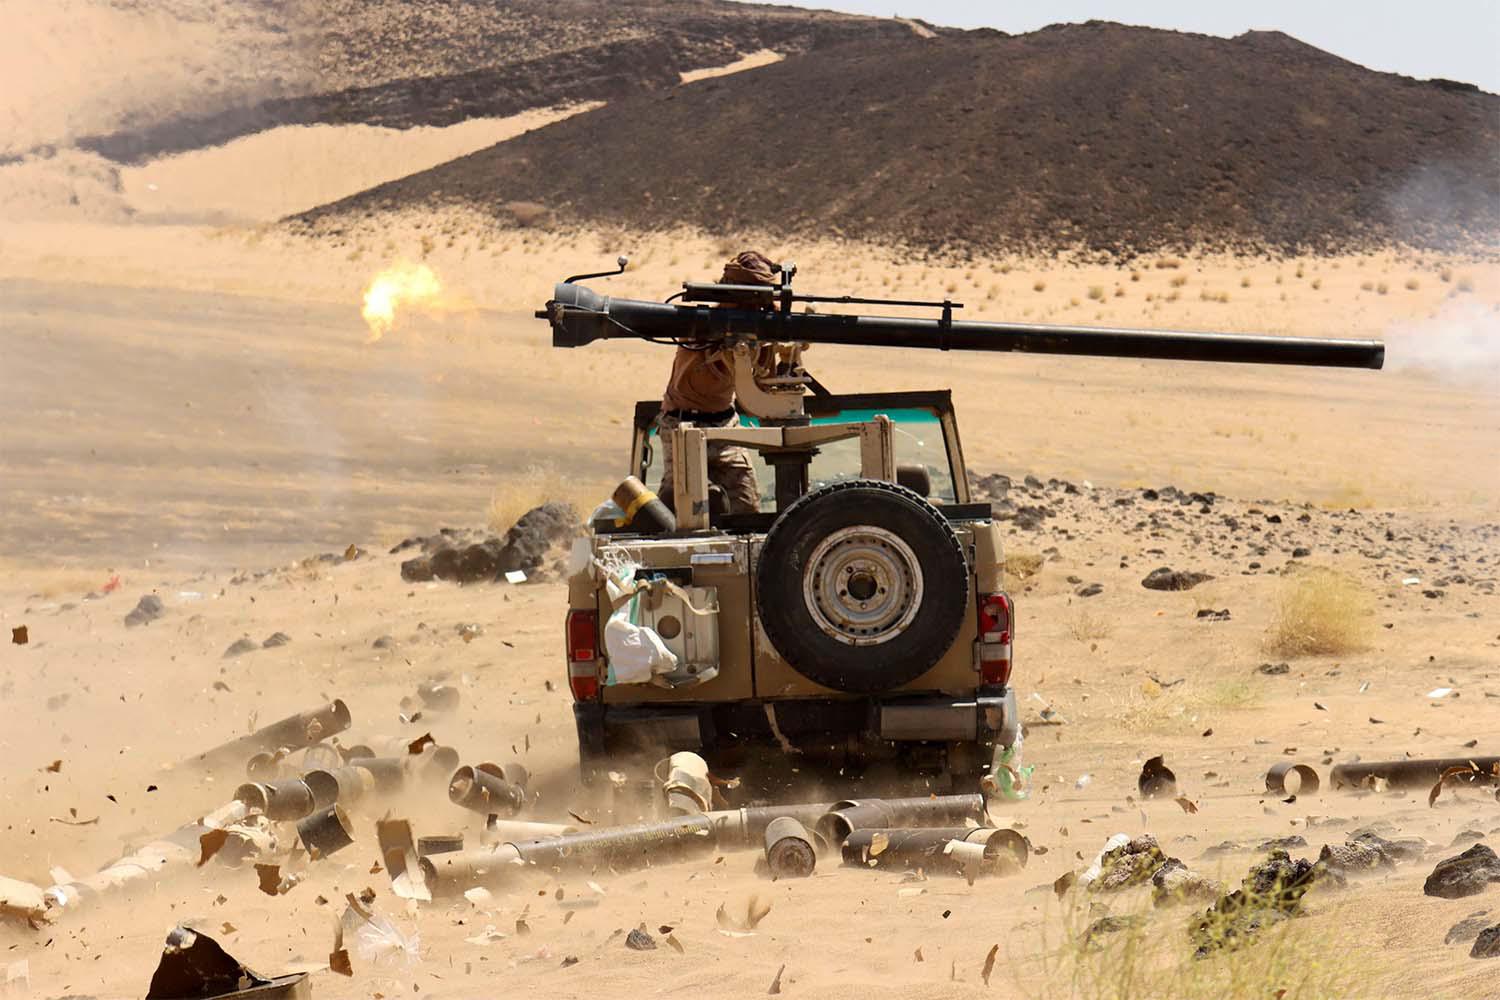 Marib has become the focal point of the war since the Houthis launched an offensive to seize the gas-rich region